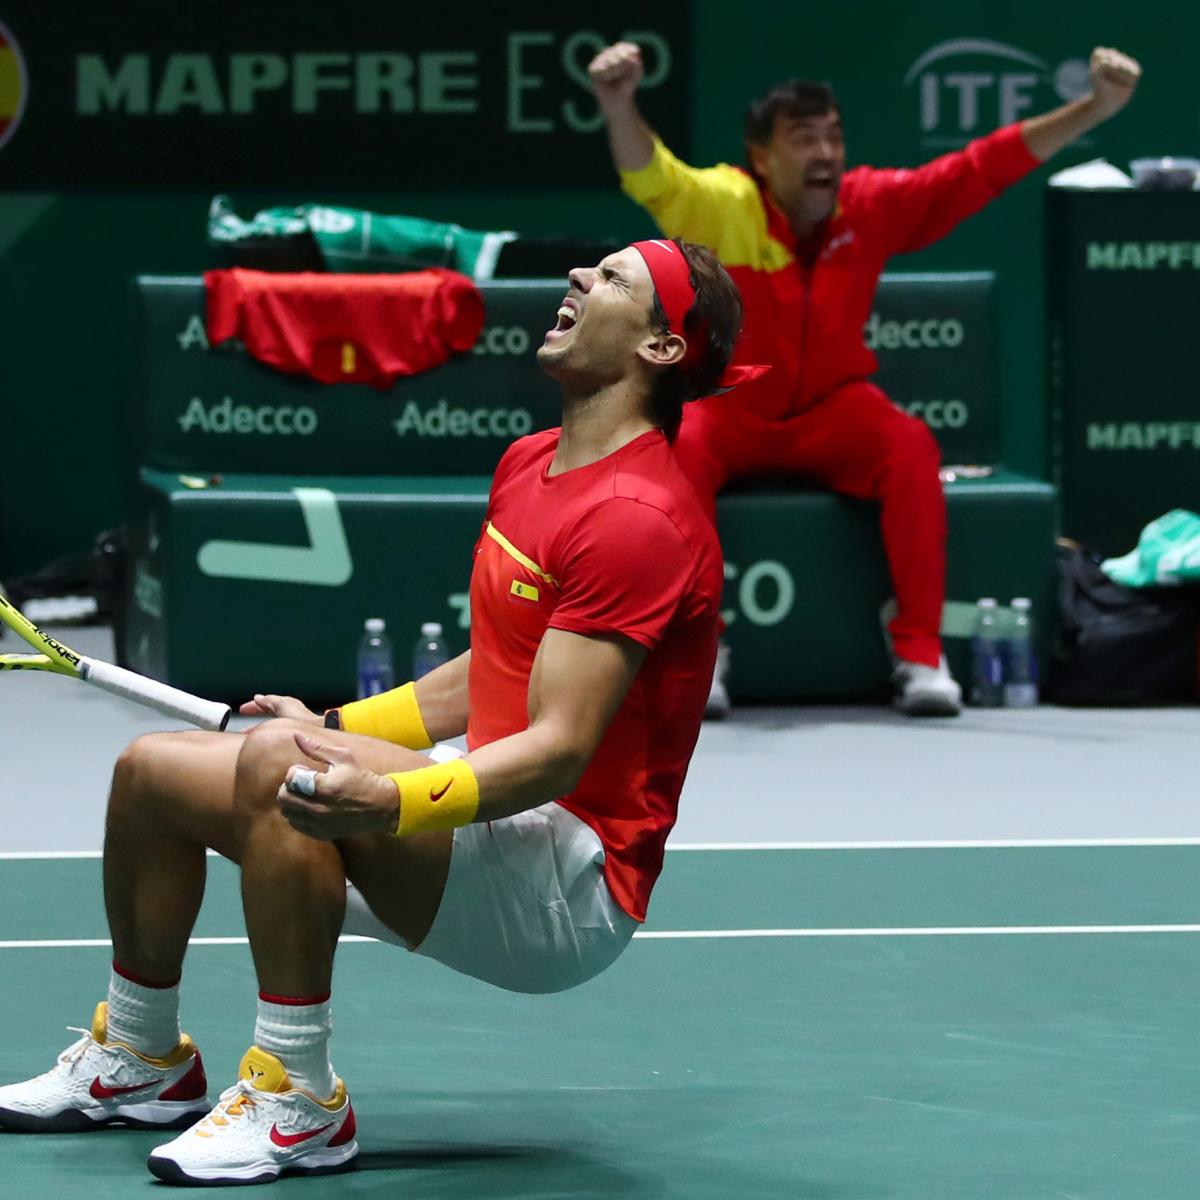 Davis Cup Finals 2019 Spain vs. Canada Set After Semifinal Results